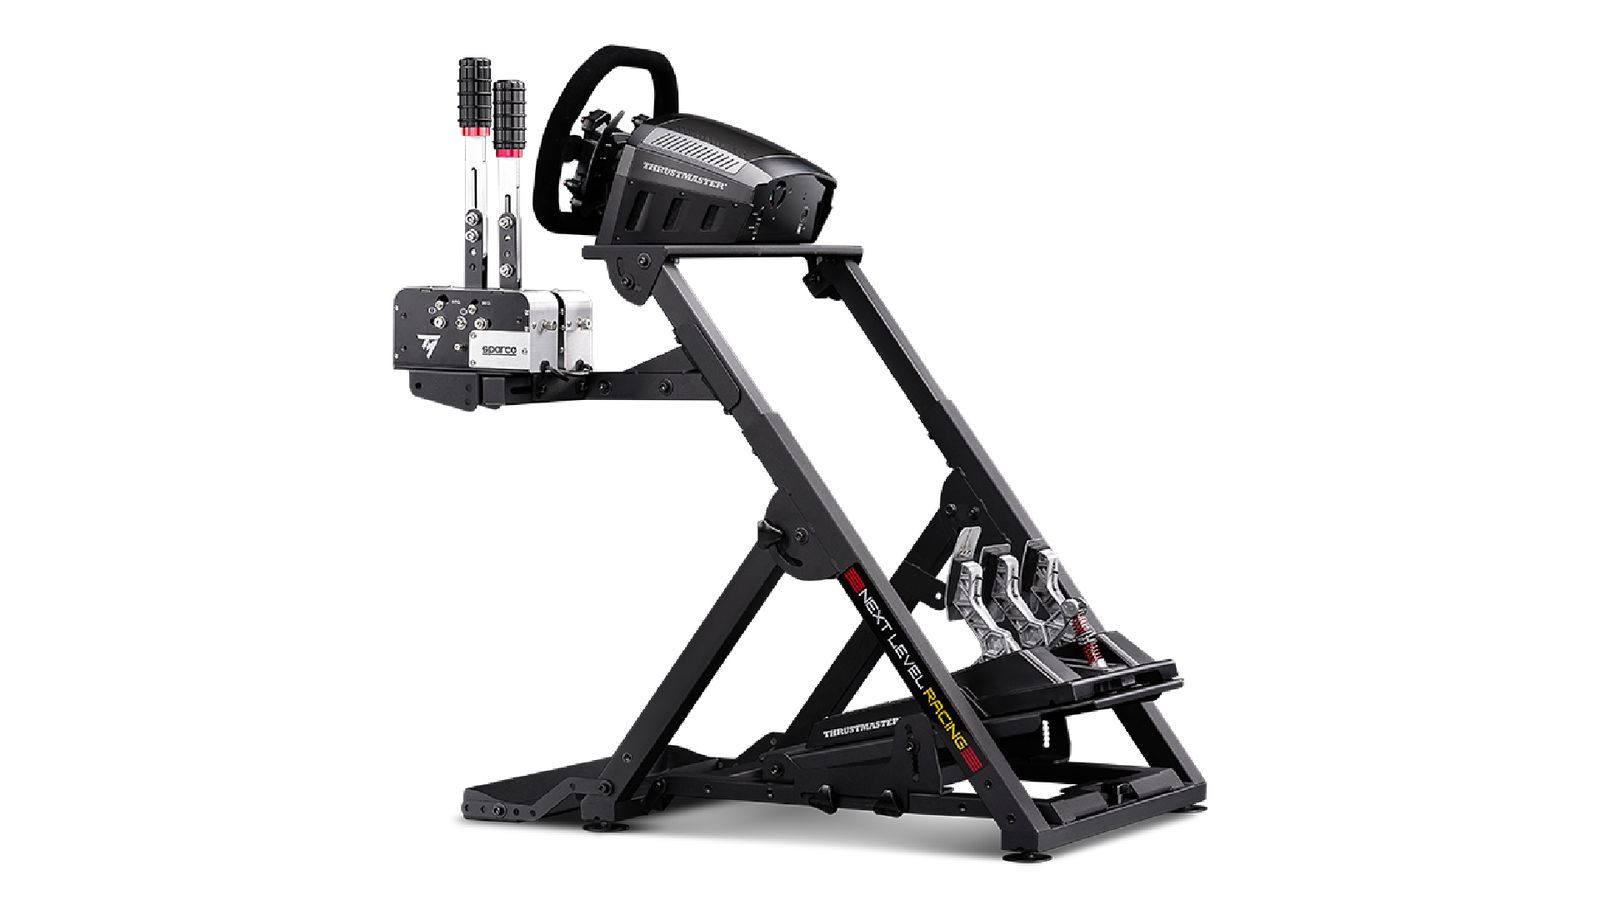 Next Level Racing Wheel Stand 2.0 product image of a black stand with a wheel, pedals, and a shifter attached.